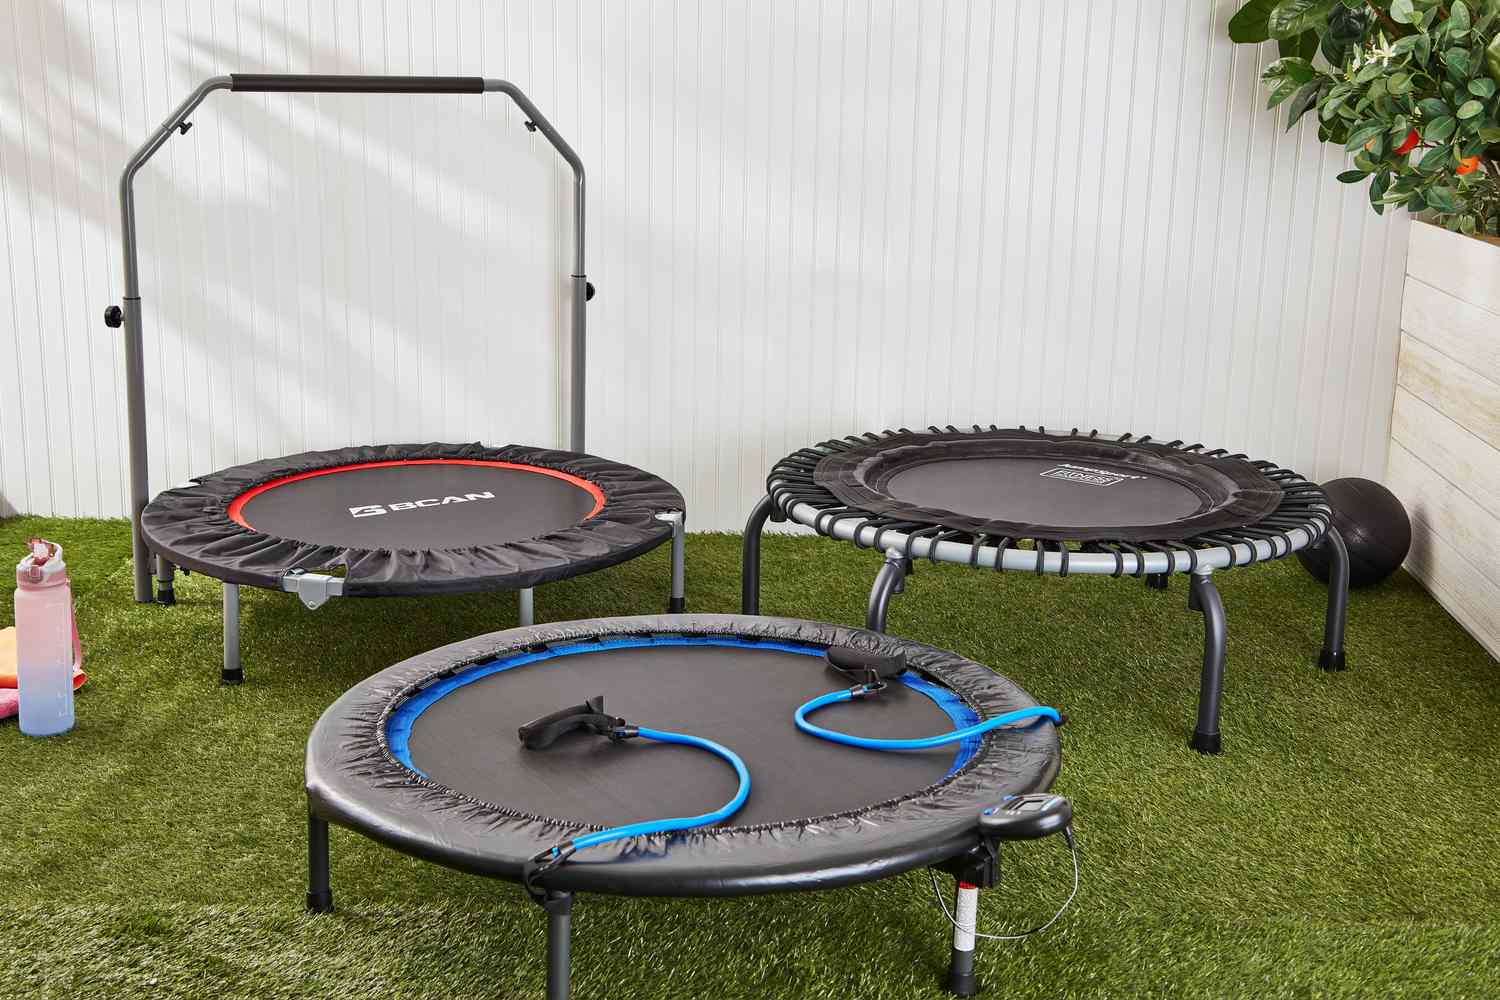 Best trampolines and rebounders displayed on lawn